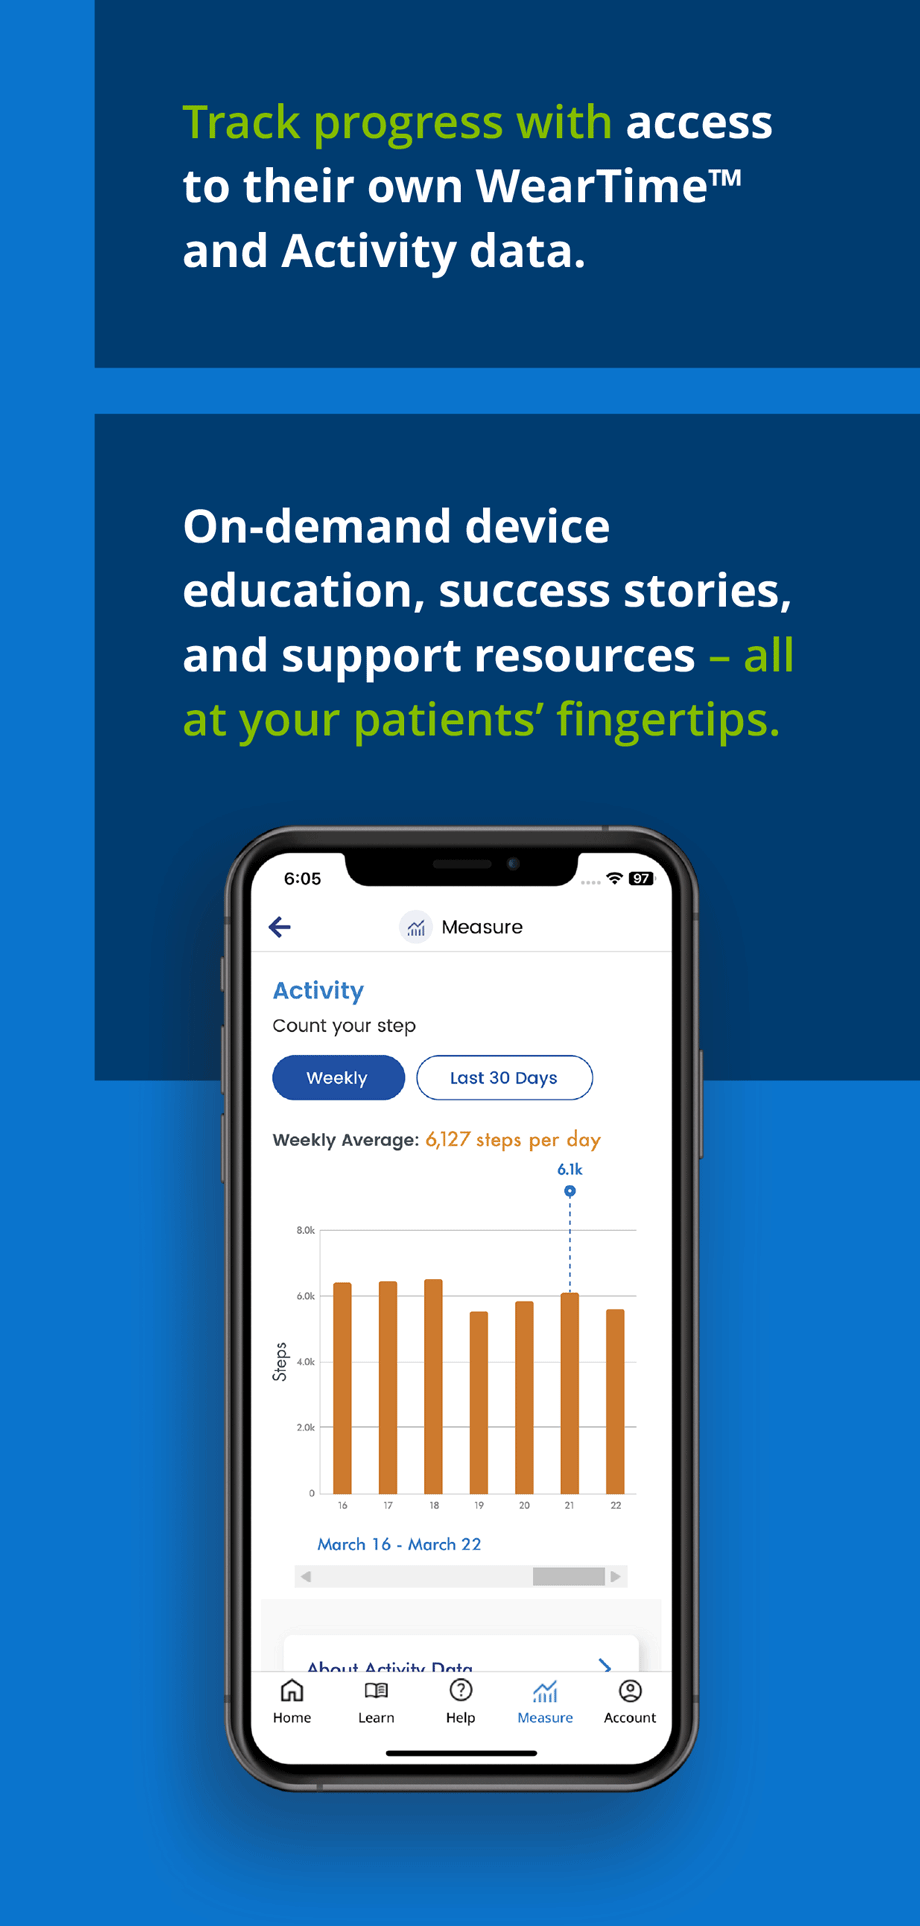 Track progress with their own WearTime and Activity Data. On-demand device education, success stories, and support resources - all at your patients' fingertips.